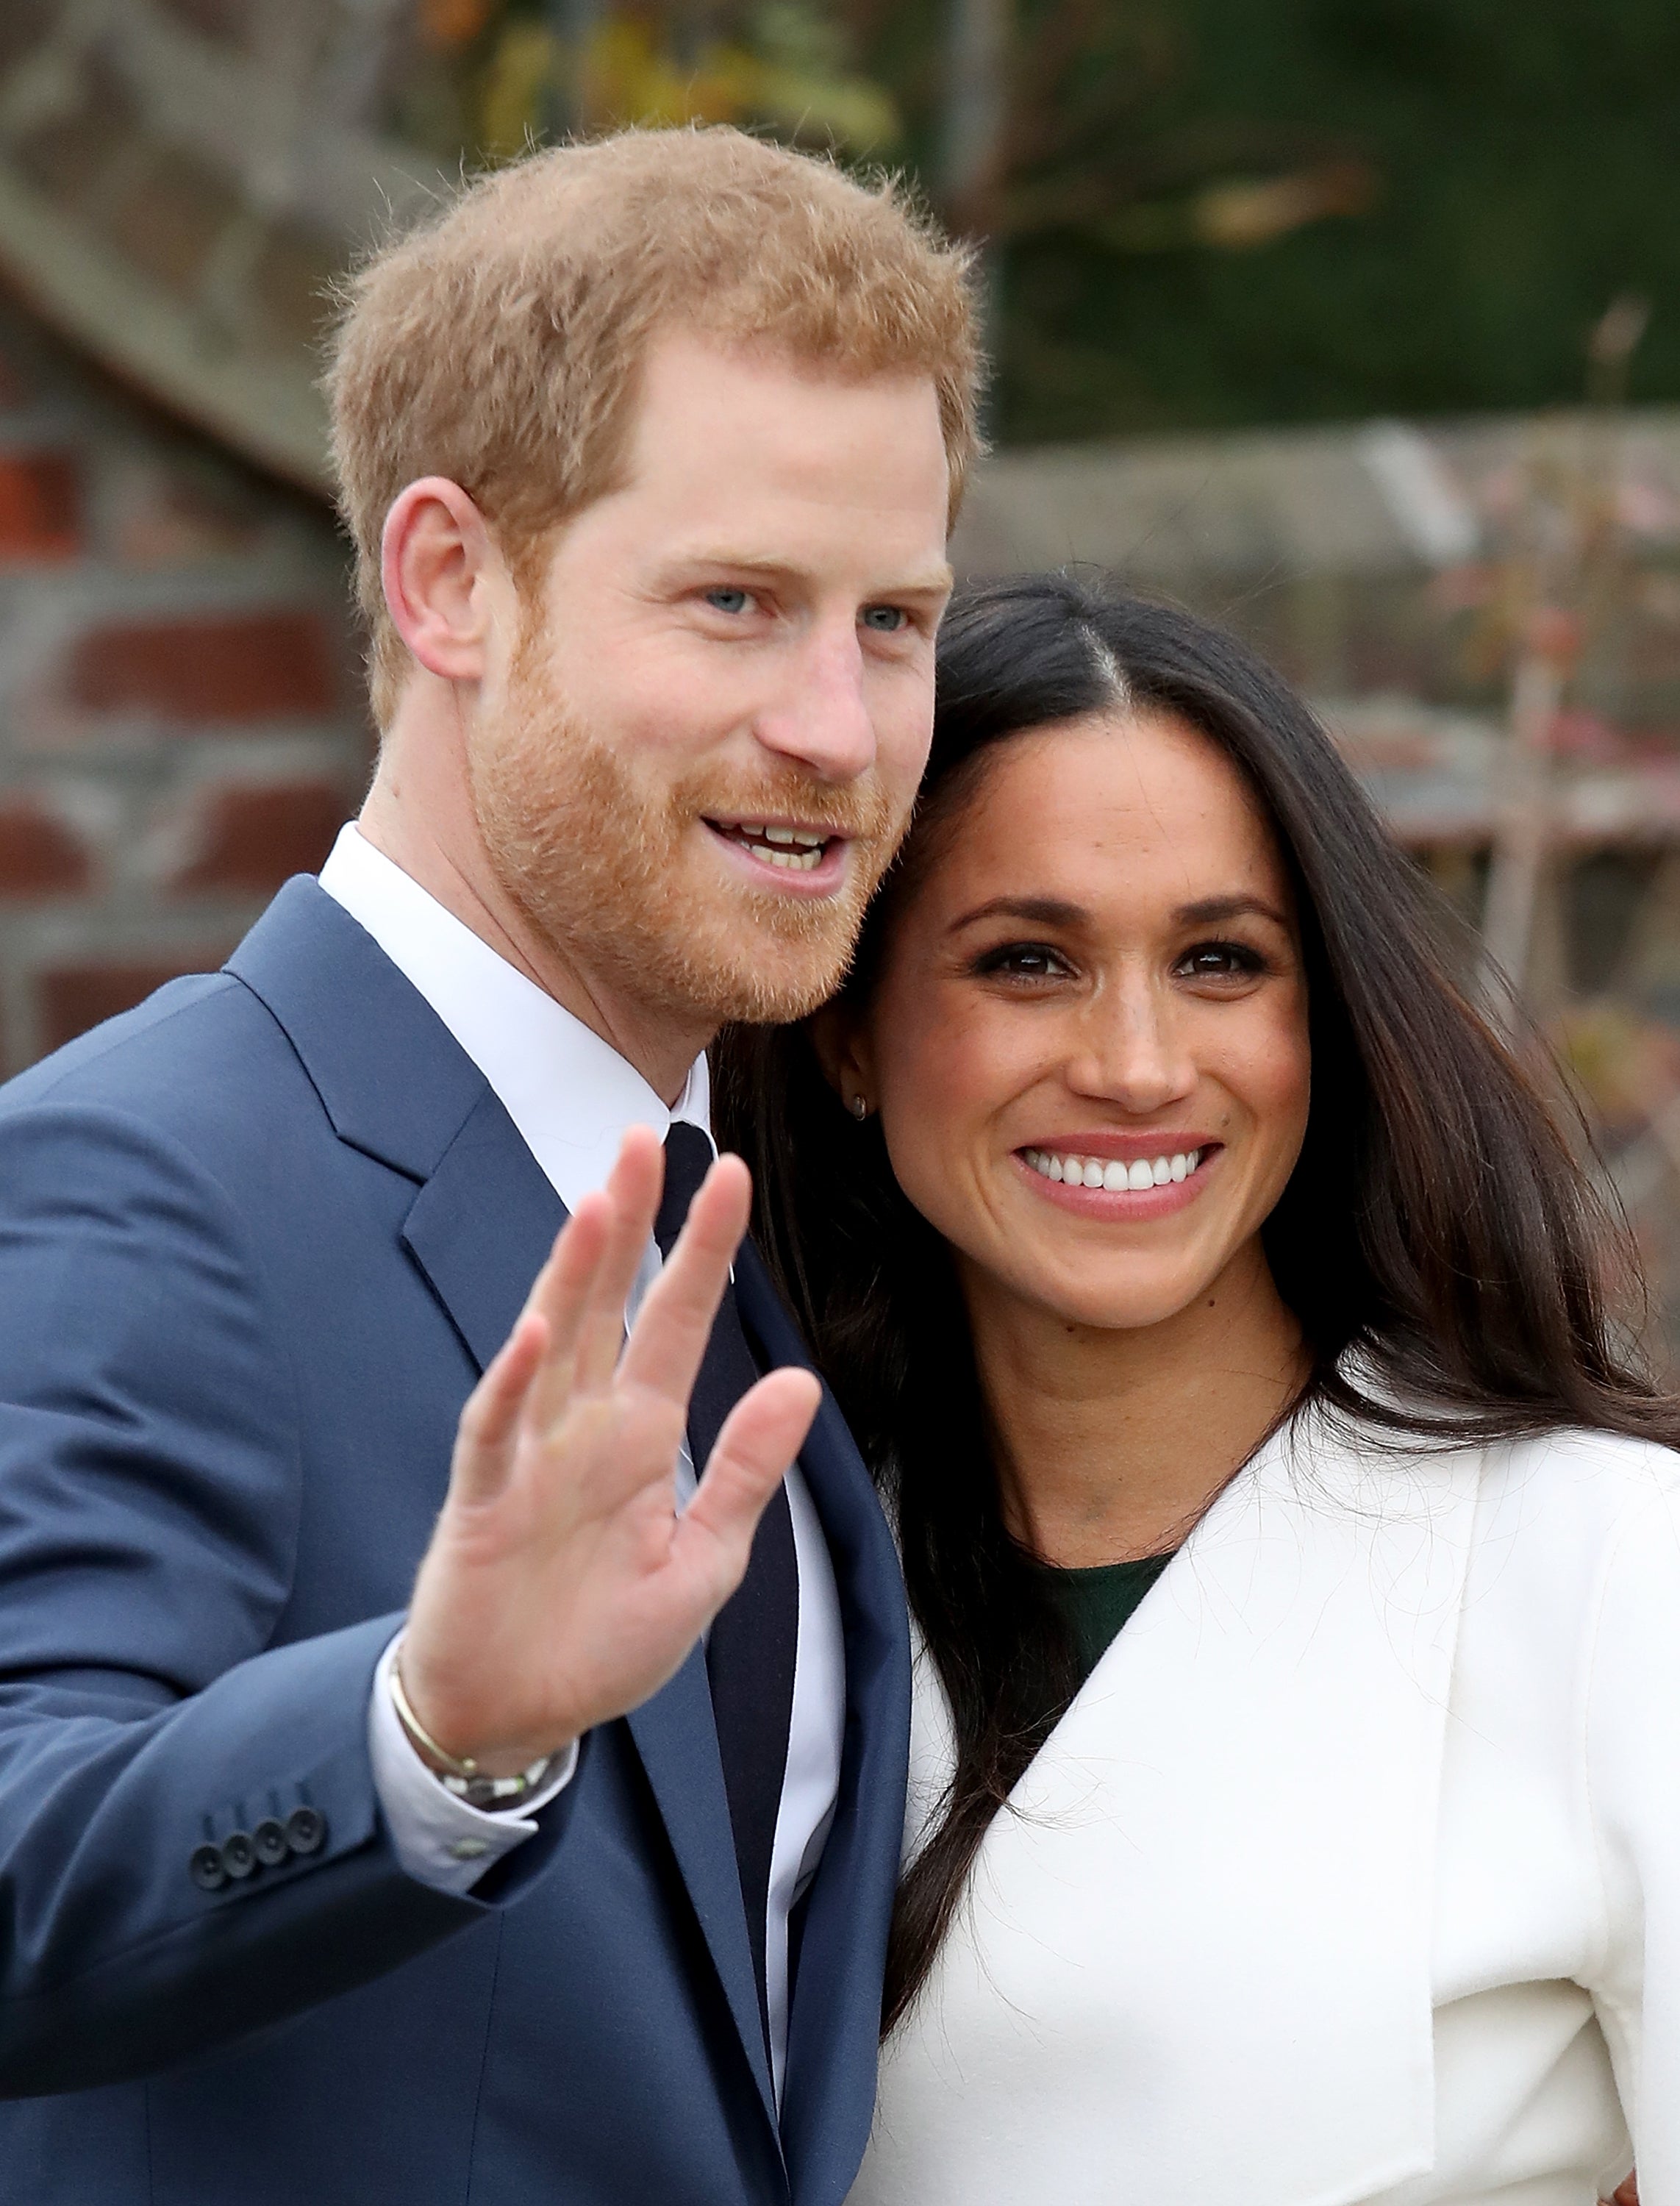 More Details About Prince Harry And Meghan Markle's Wedding Day Have Been Revealed
